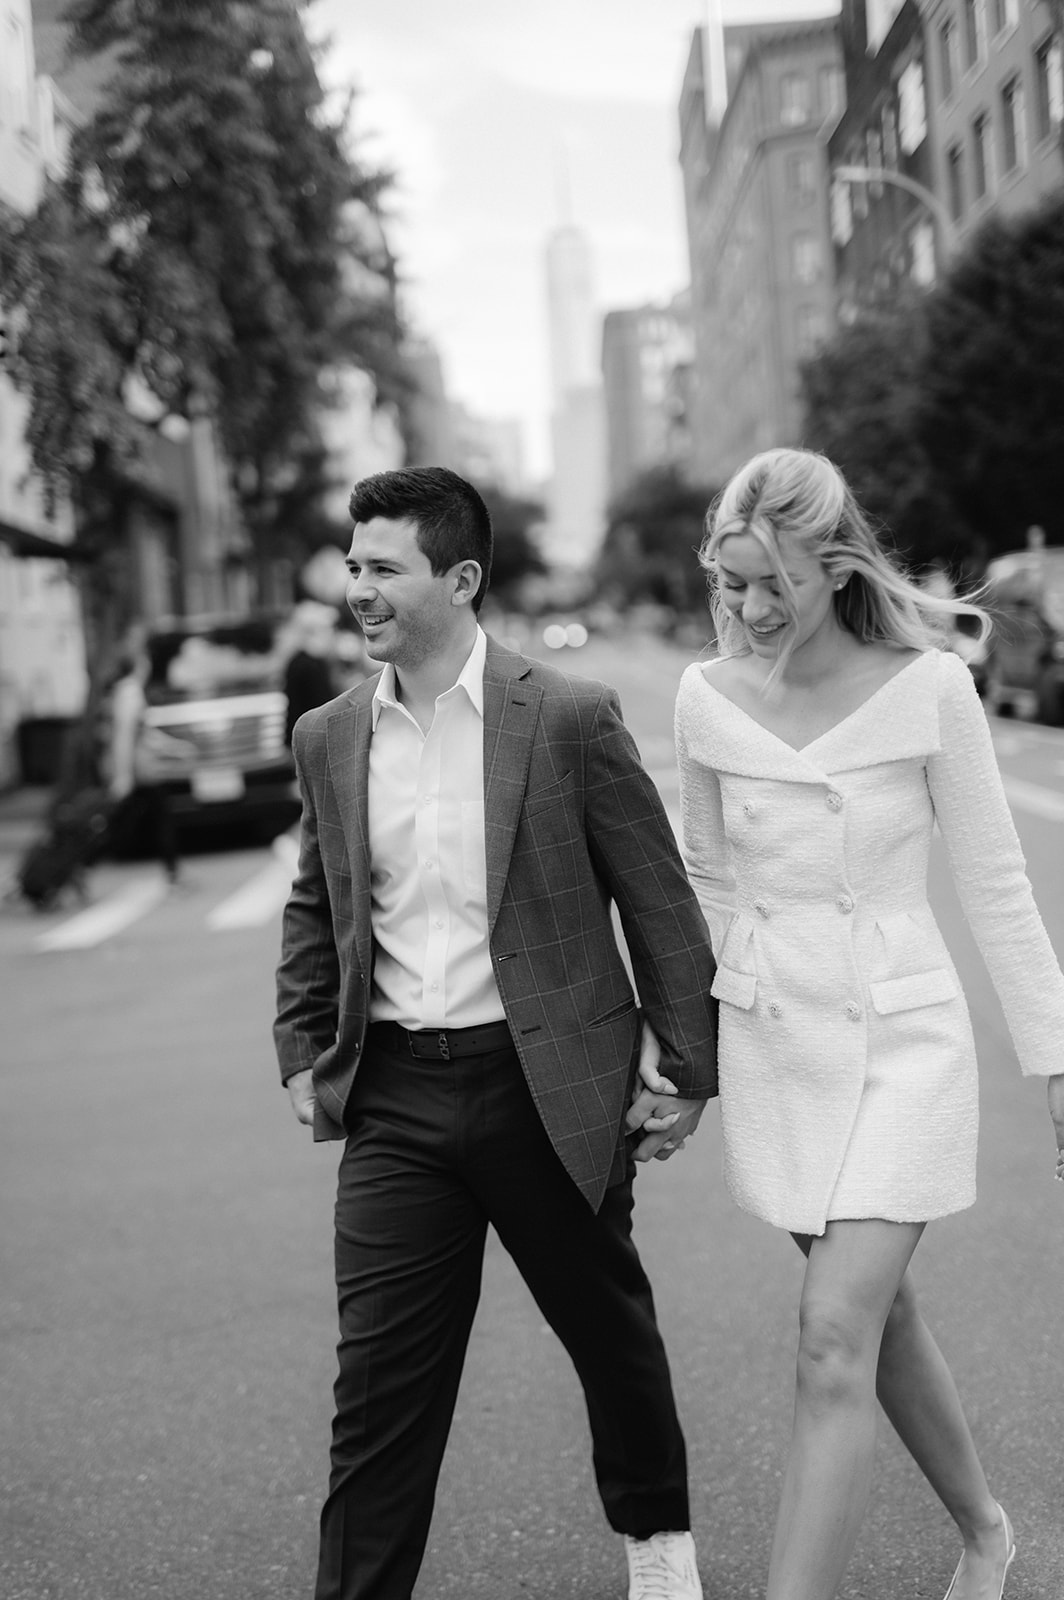 Romantic engagement shoot in West Village, NYC.